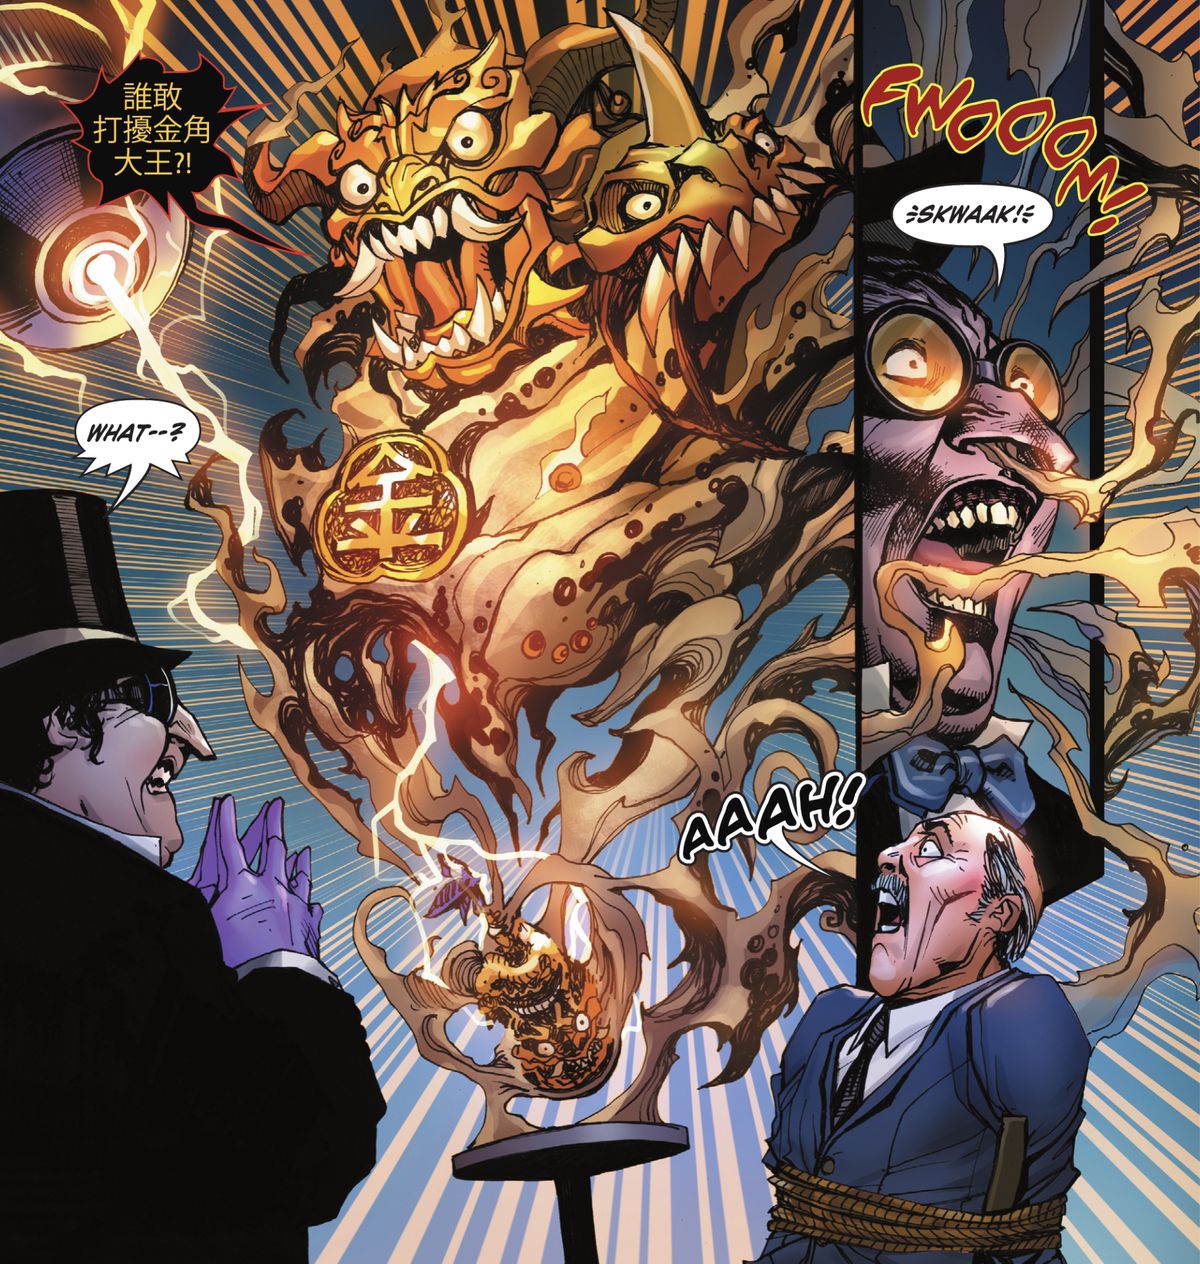 A Chinese golden demon emerges from a carved gold gourd to threaten a surprised Penguin in Monkey Prince #1 (2022).